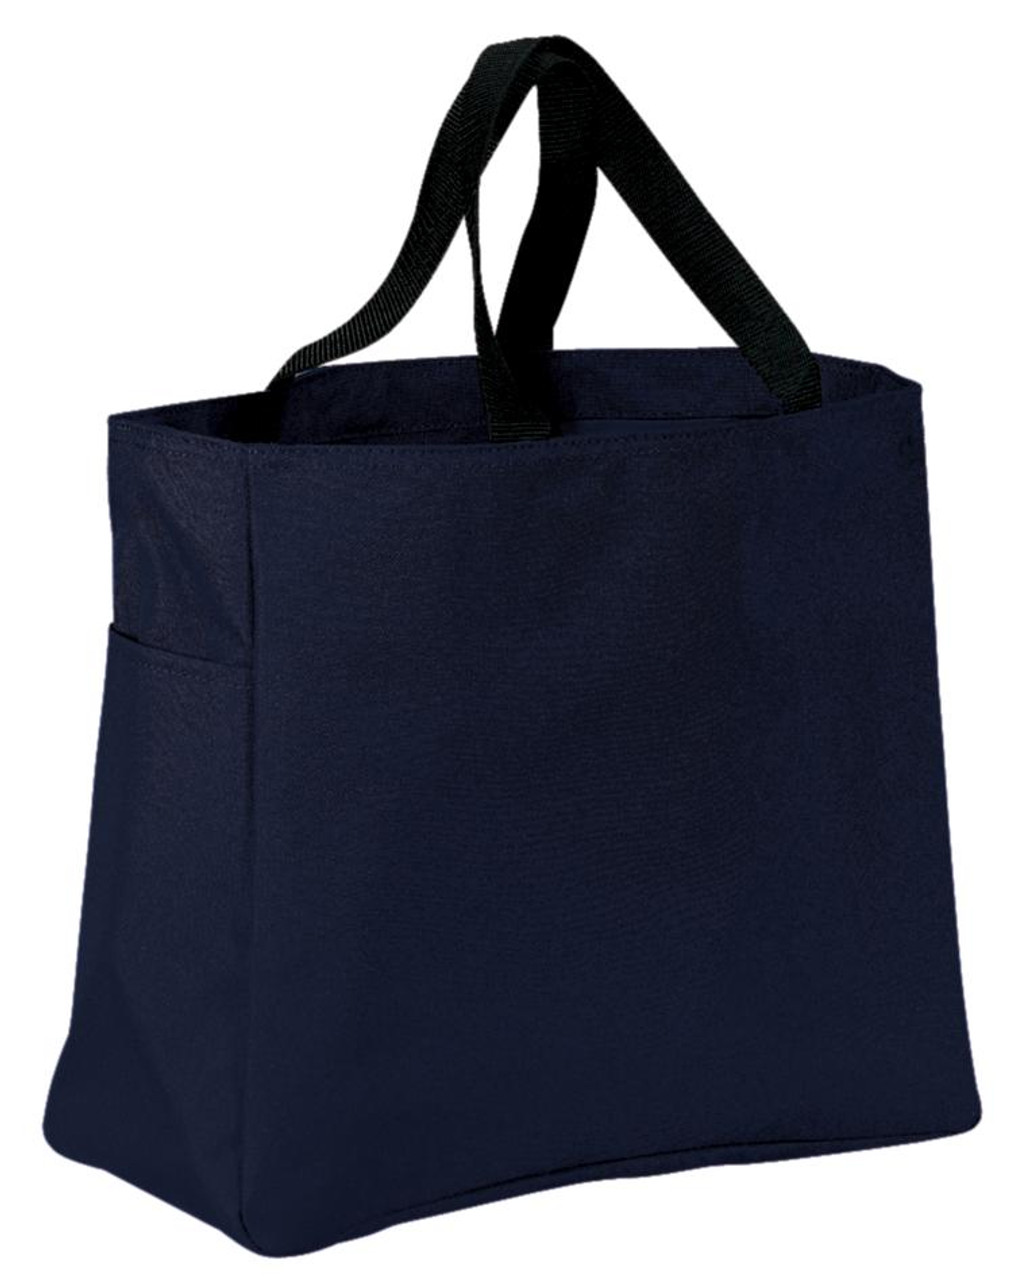 Port Authority® -  Essential Tote.  B0750 Navy